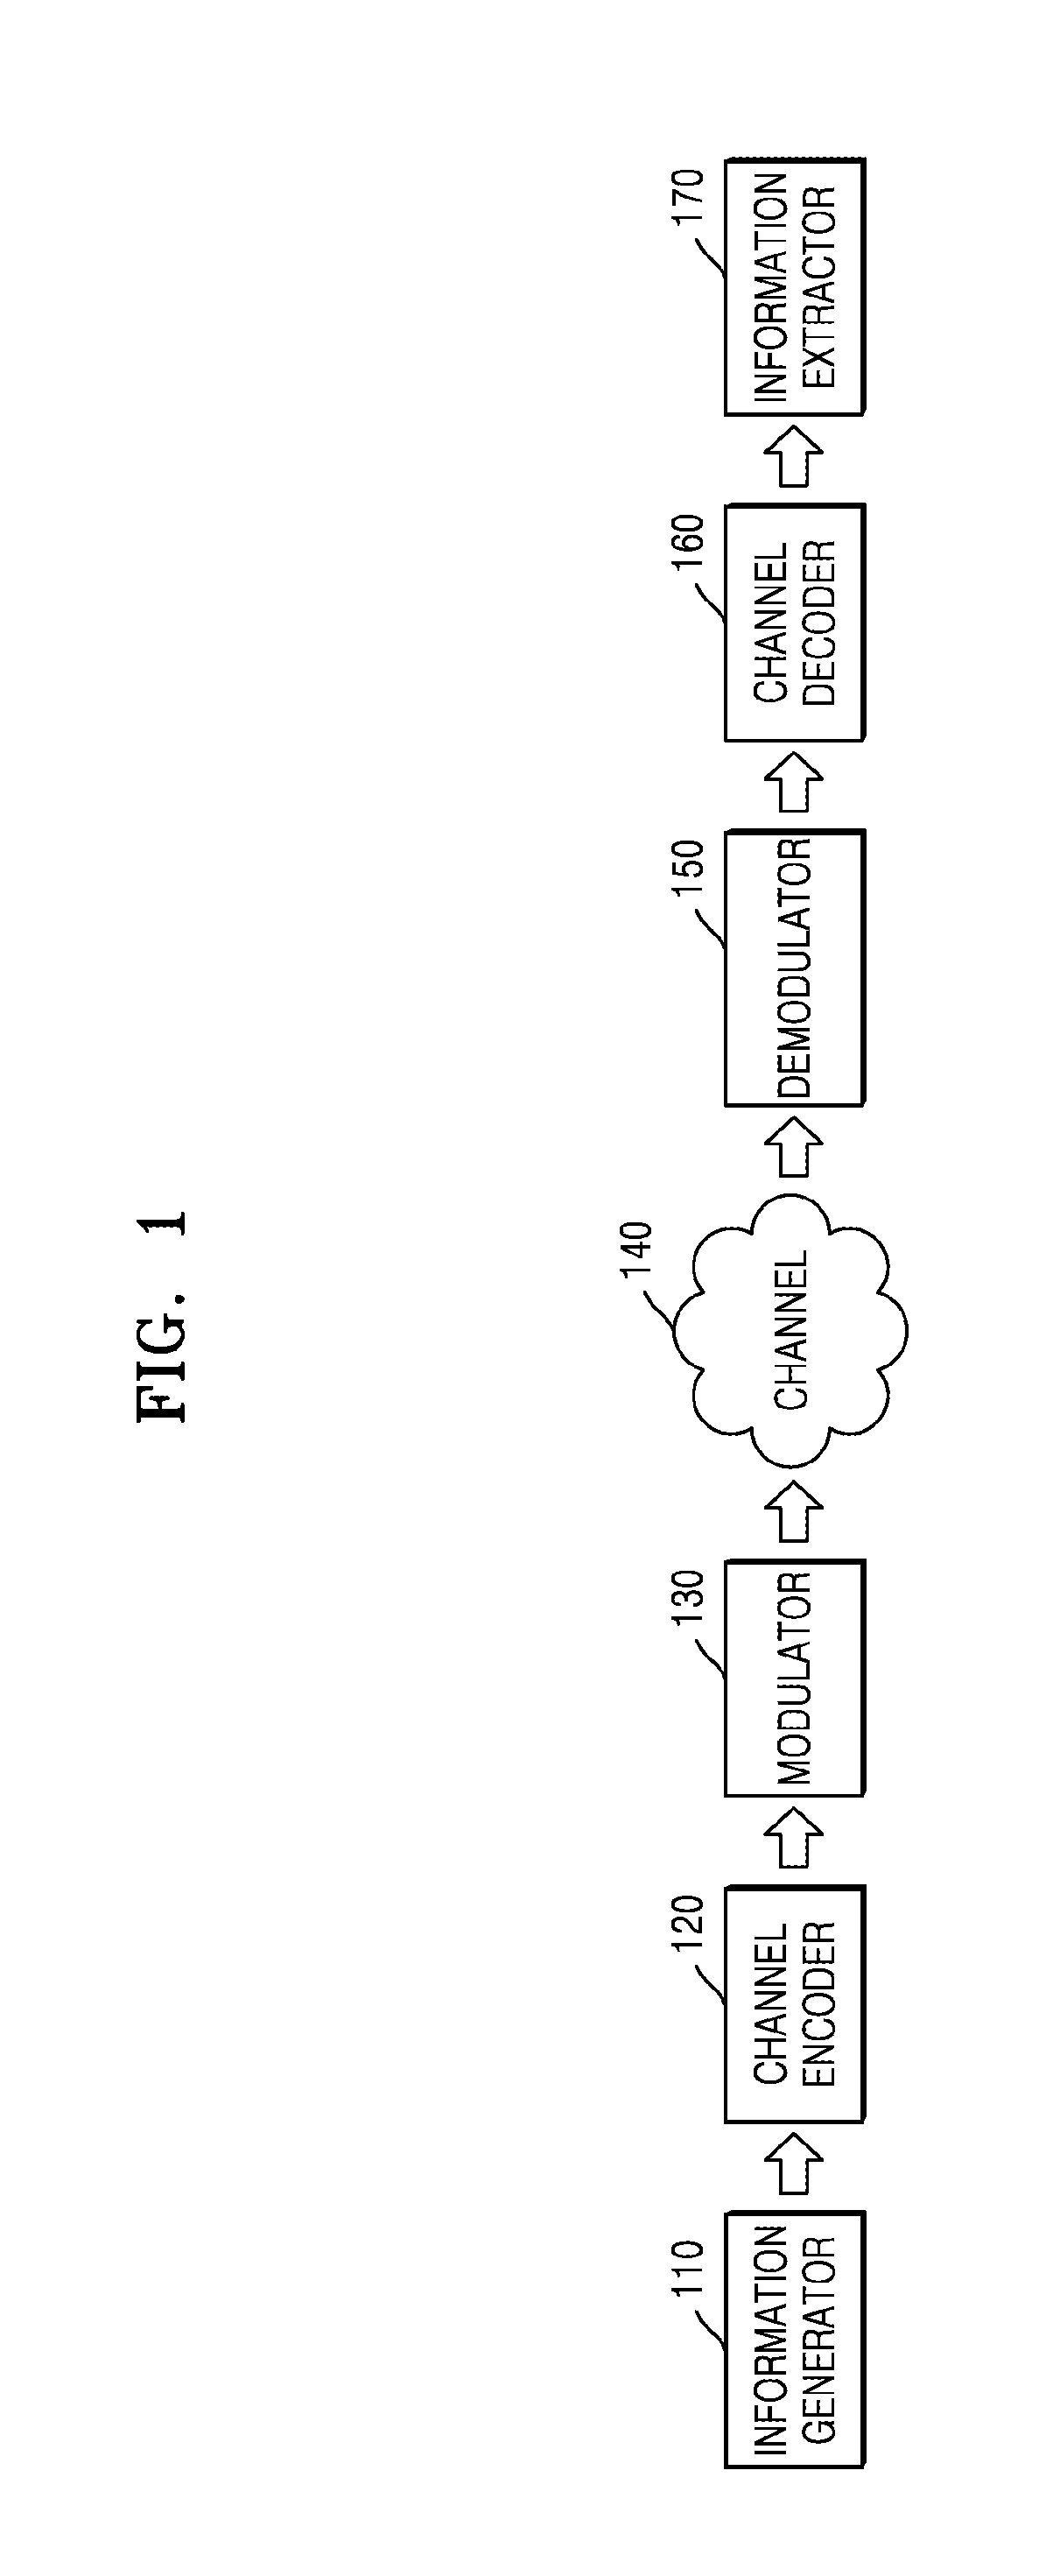 Channel decoding method and apparatus using structured priori information of preamble